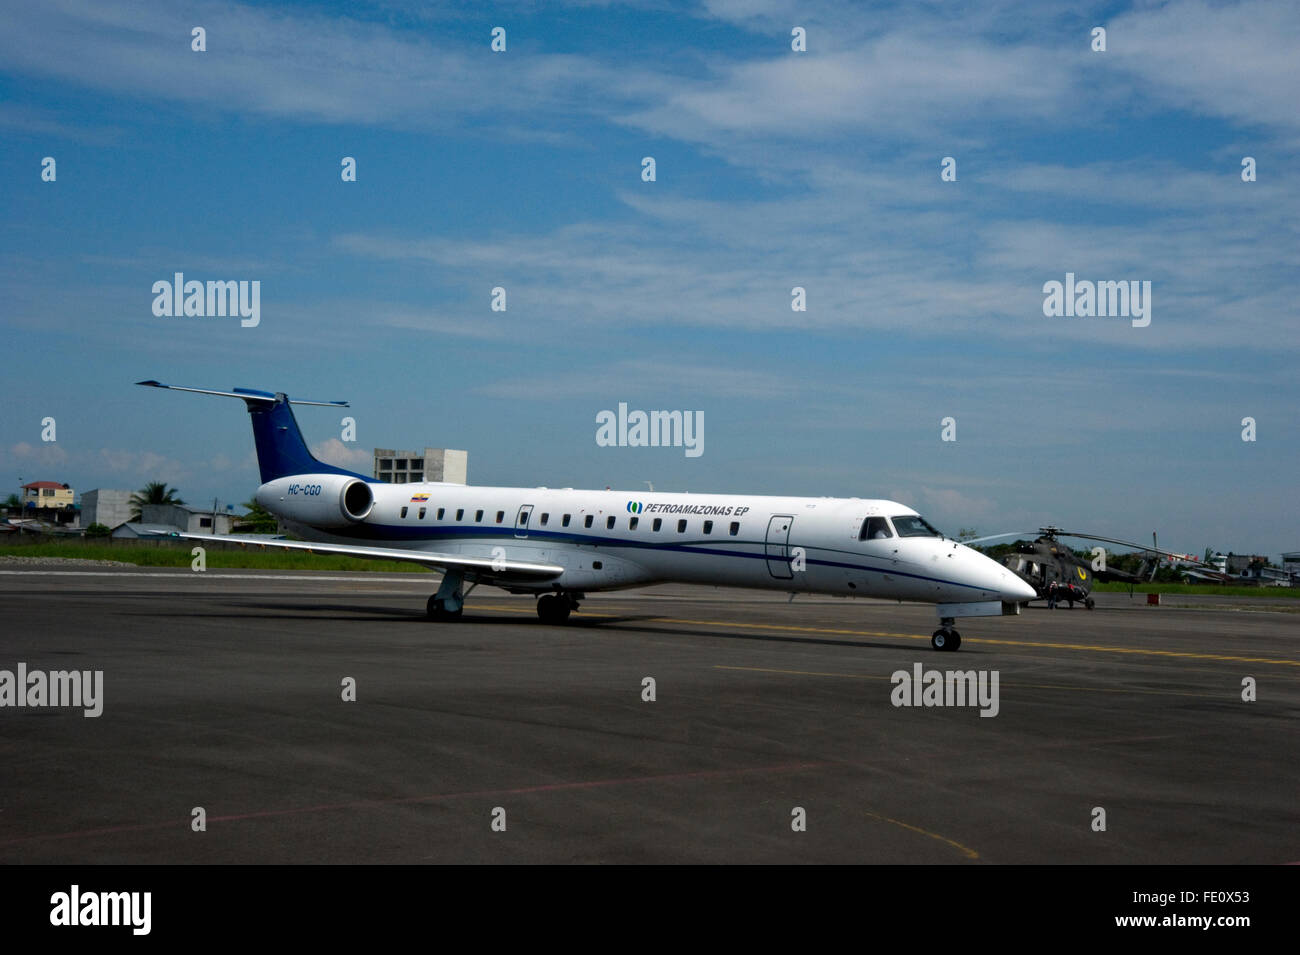 Jet plane on tarmac at airport in Ecuador, South America Stock Photo